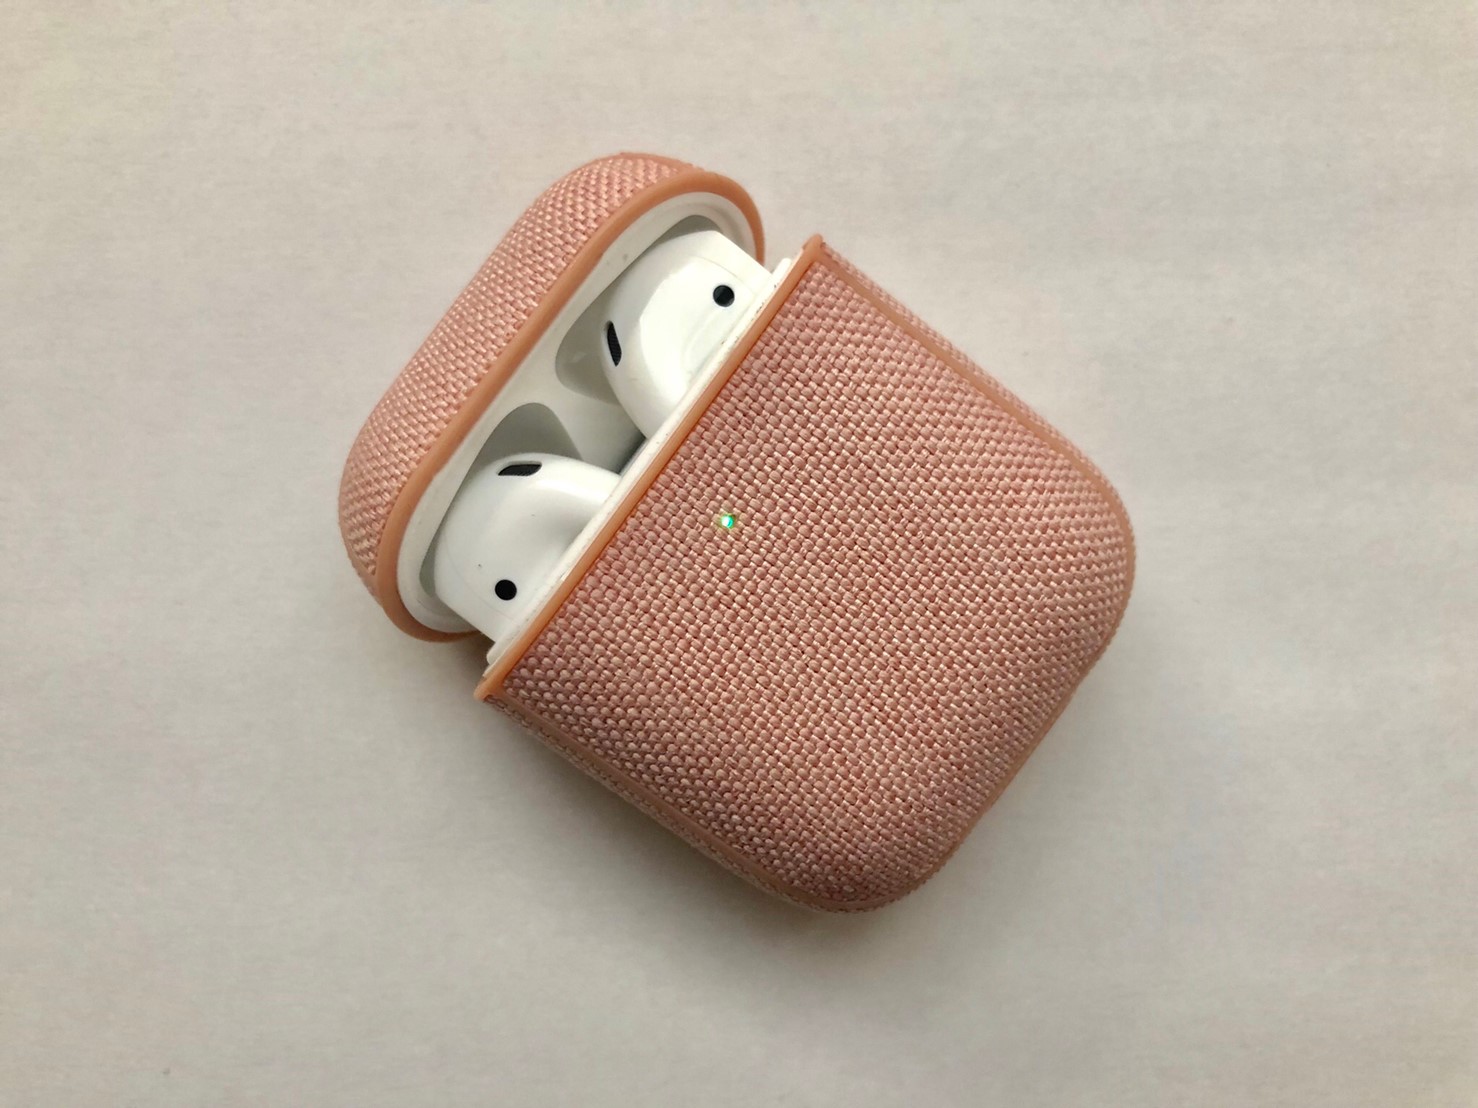 Incase AirPods Case with Woolenex - ブラッシュピンク　AirPodsにつけたところ